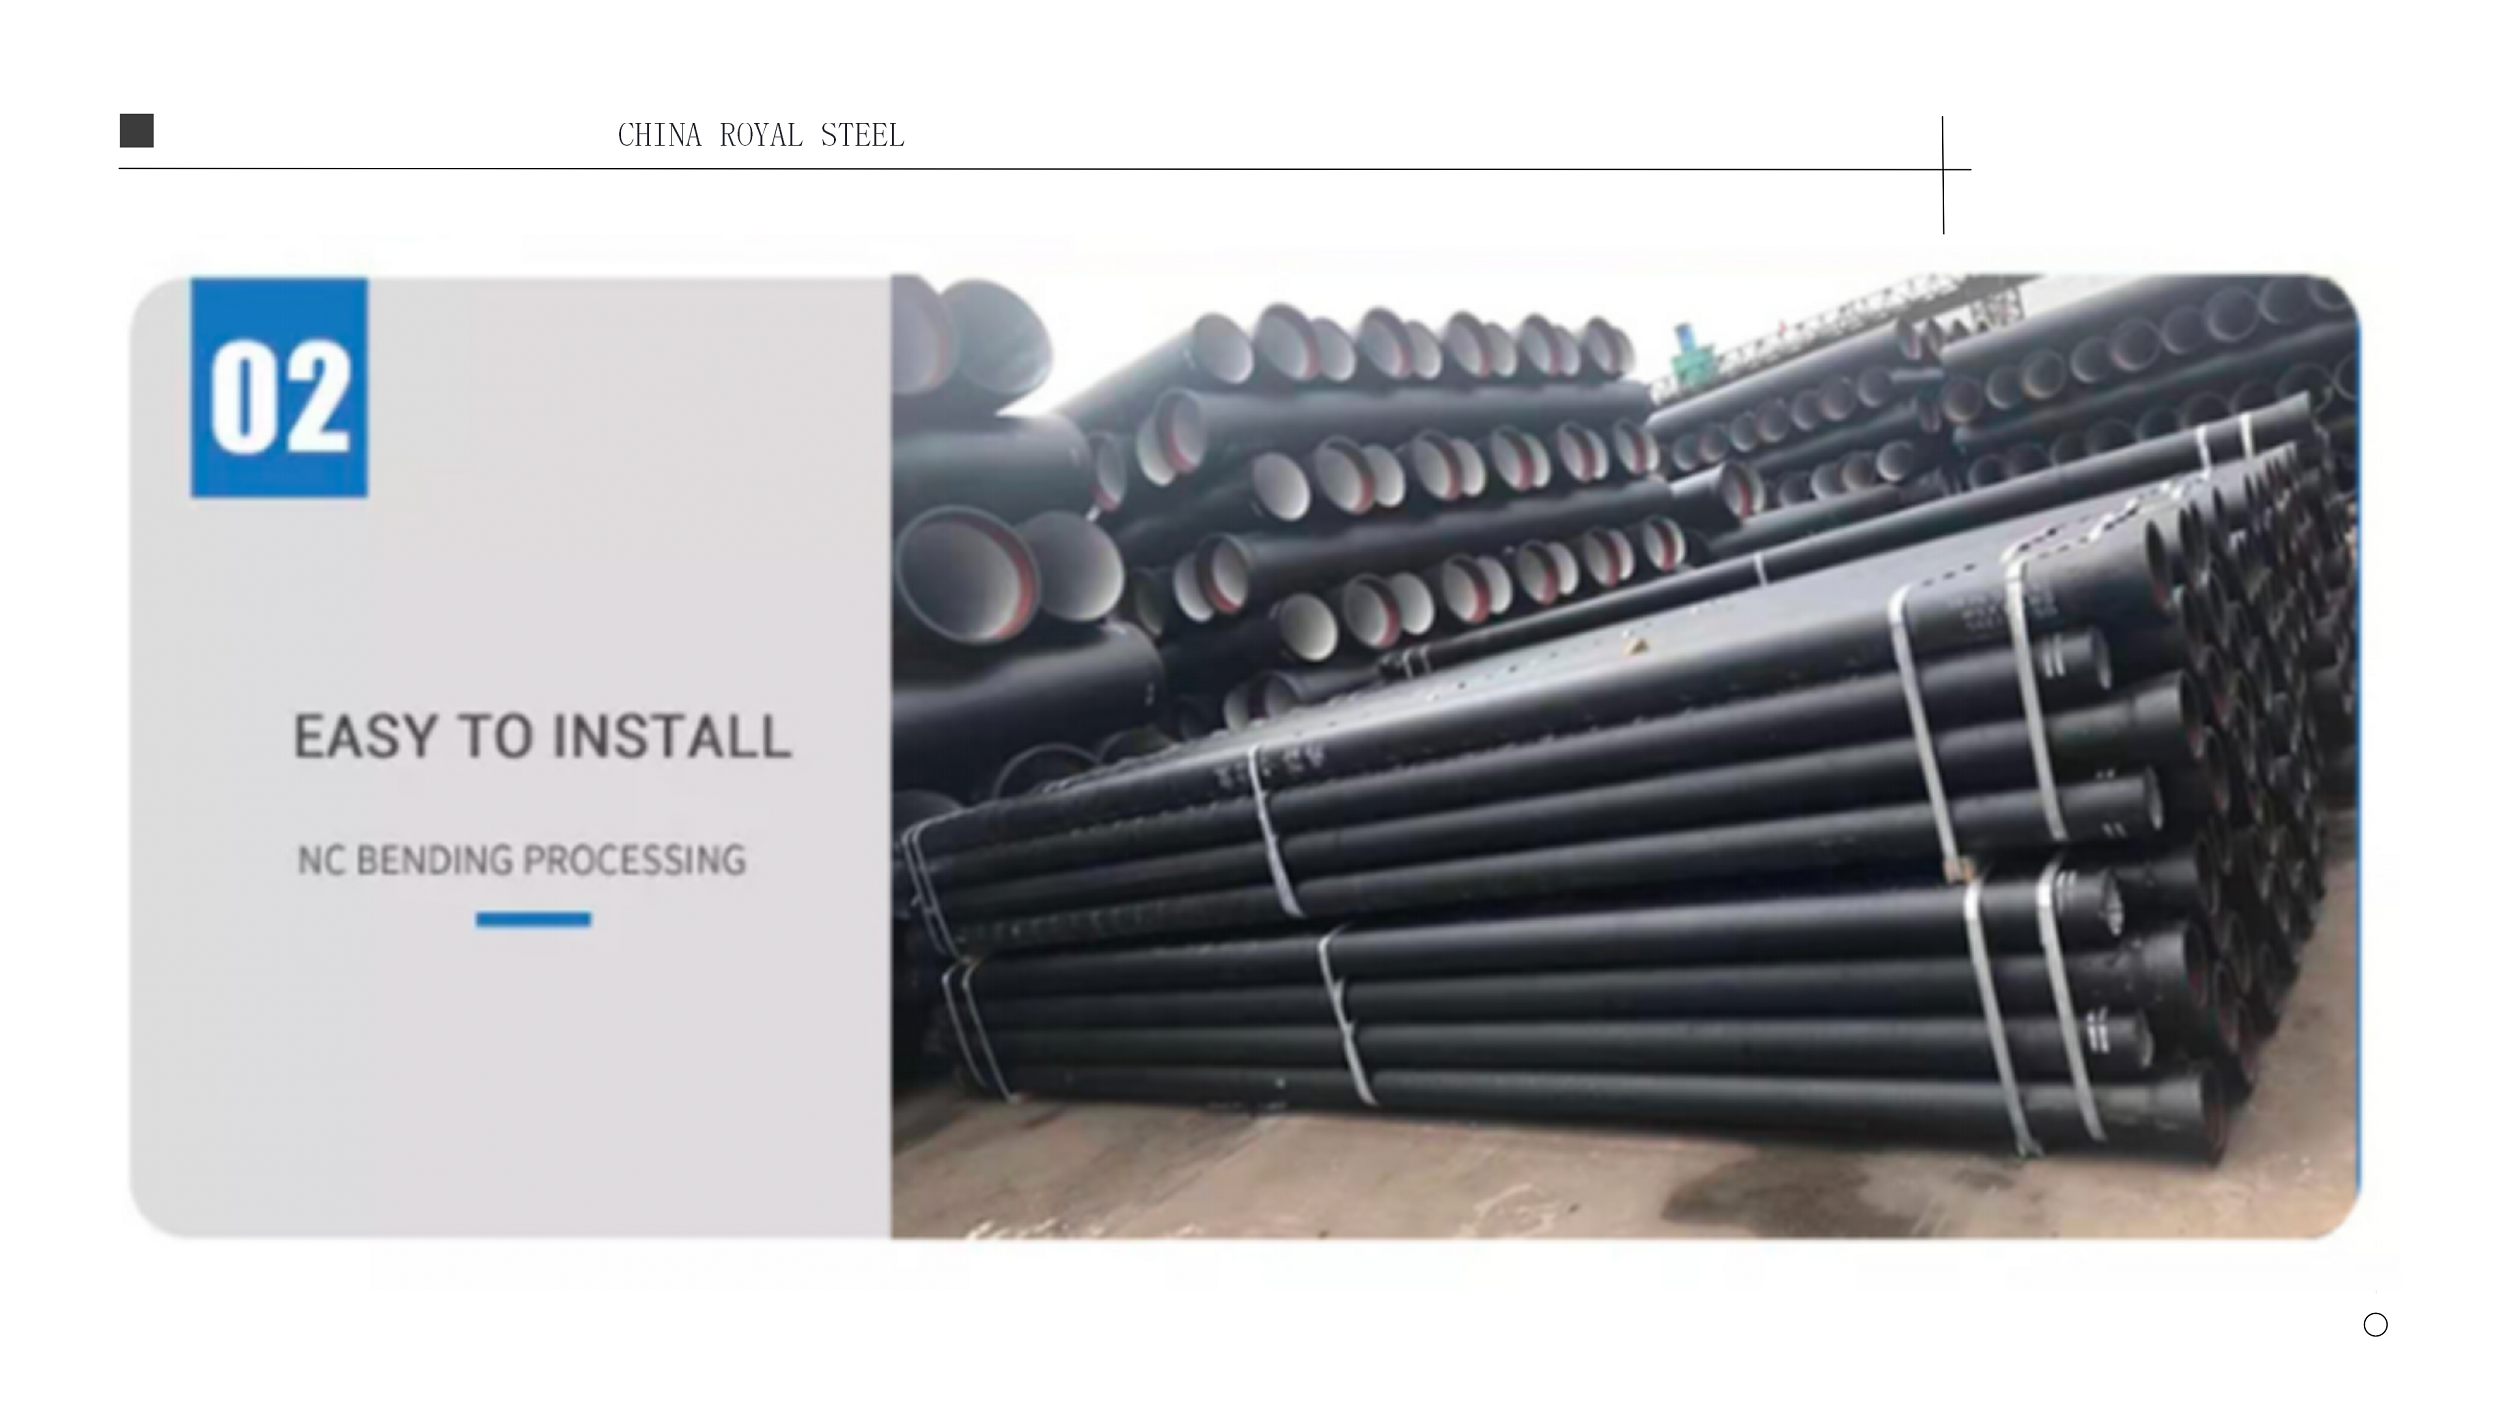 Ductile iron pipe (7)